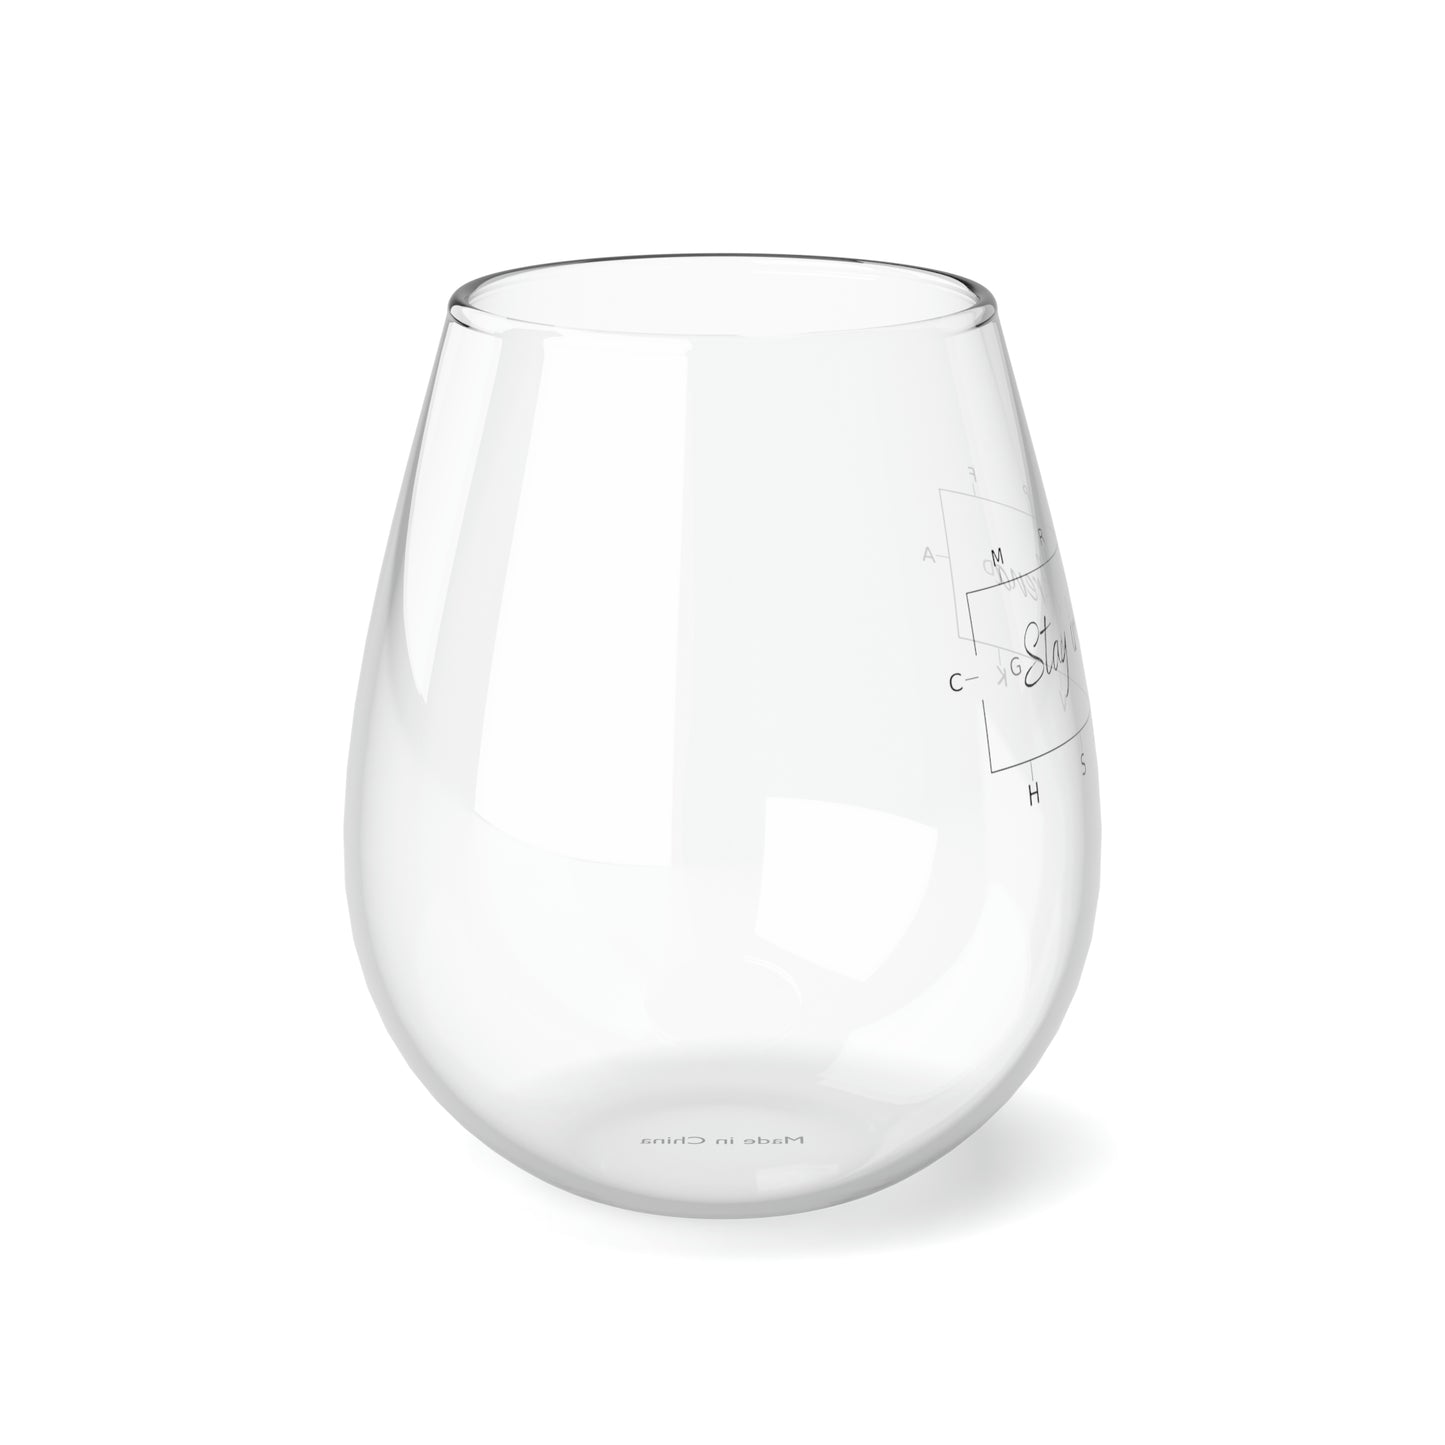 Stay in the Arena Stemless Wine Glass, 11.75oz